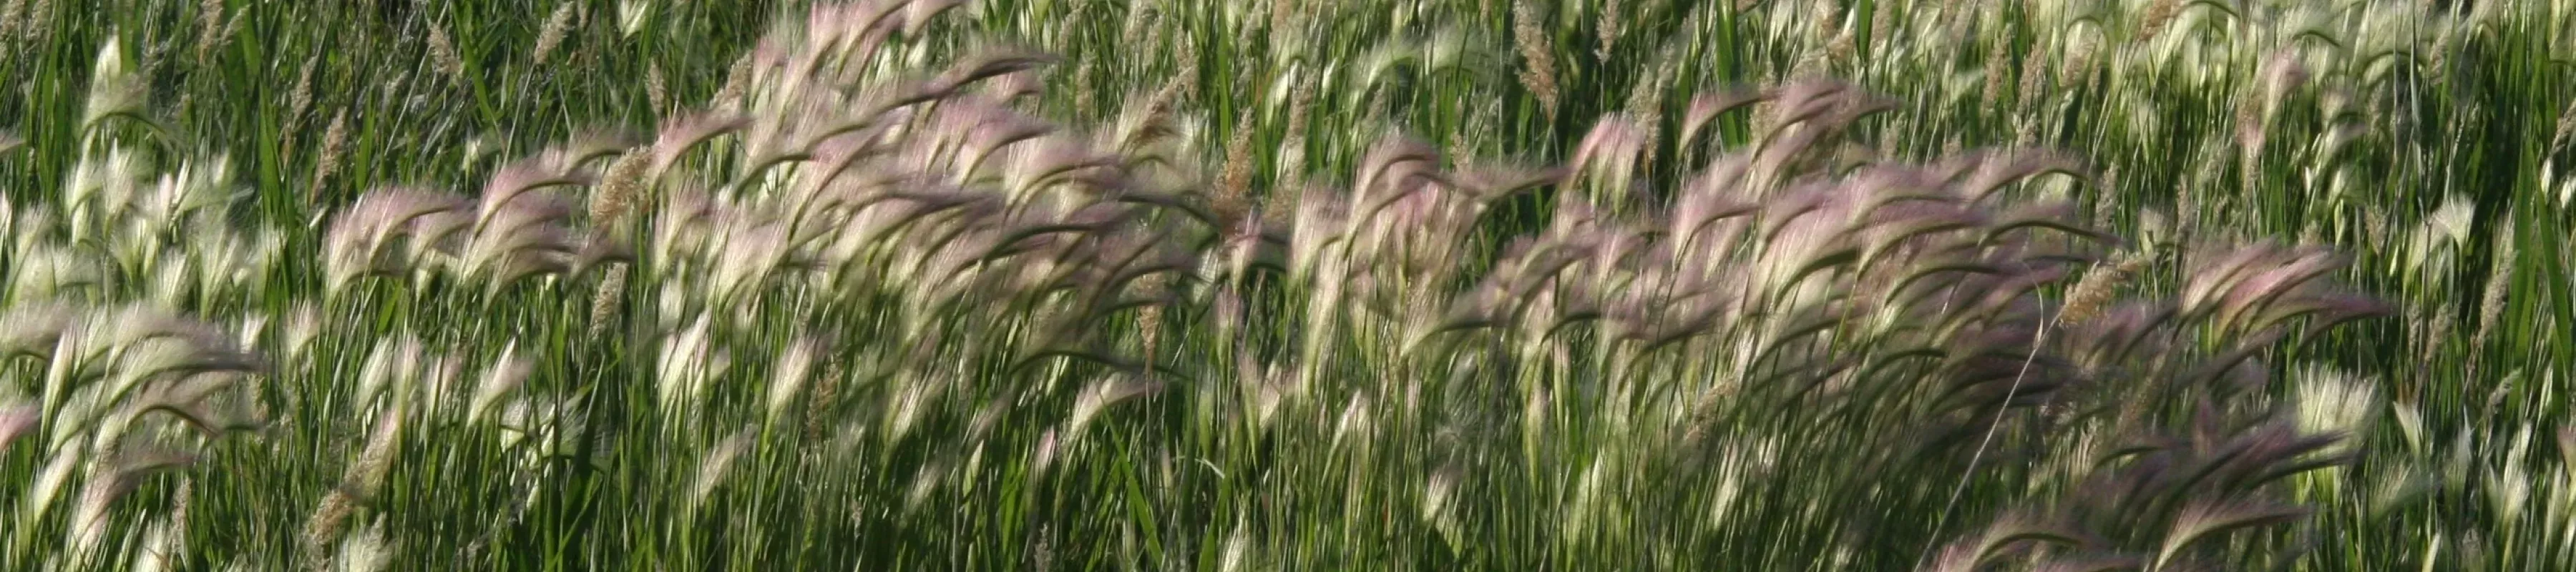 Swaying purple and green grasses in prairie